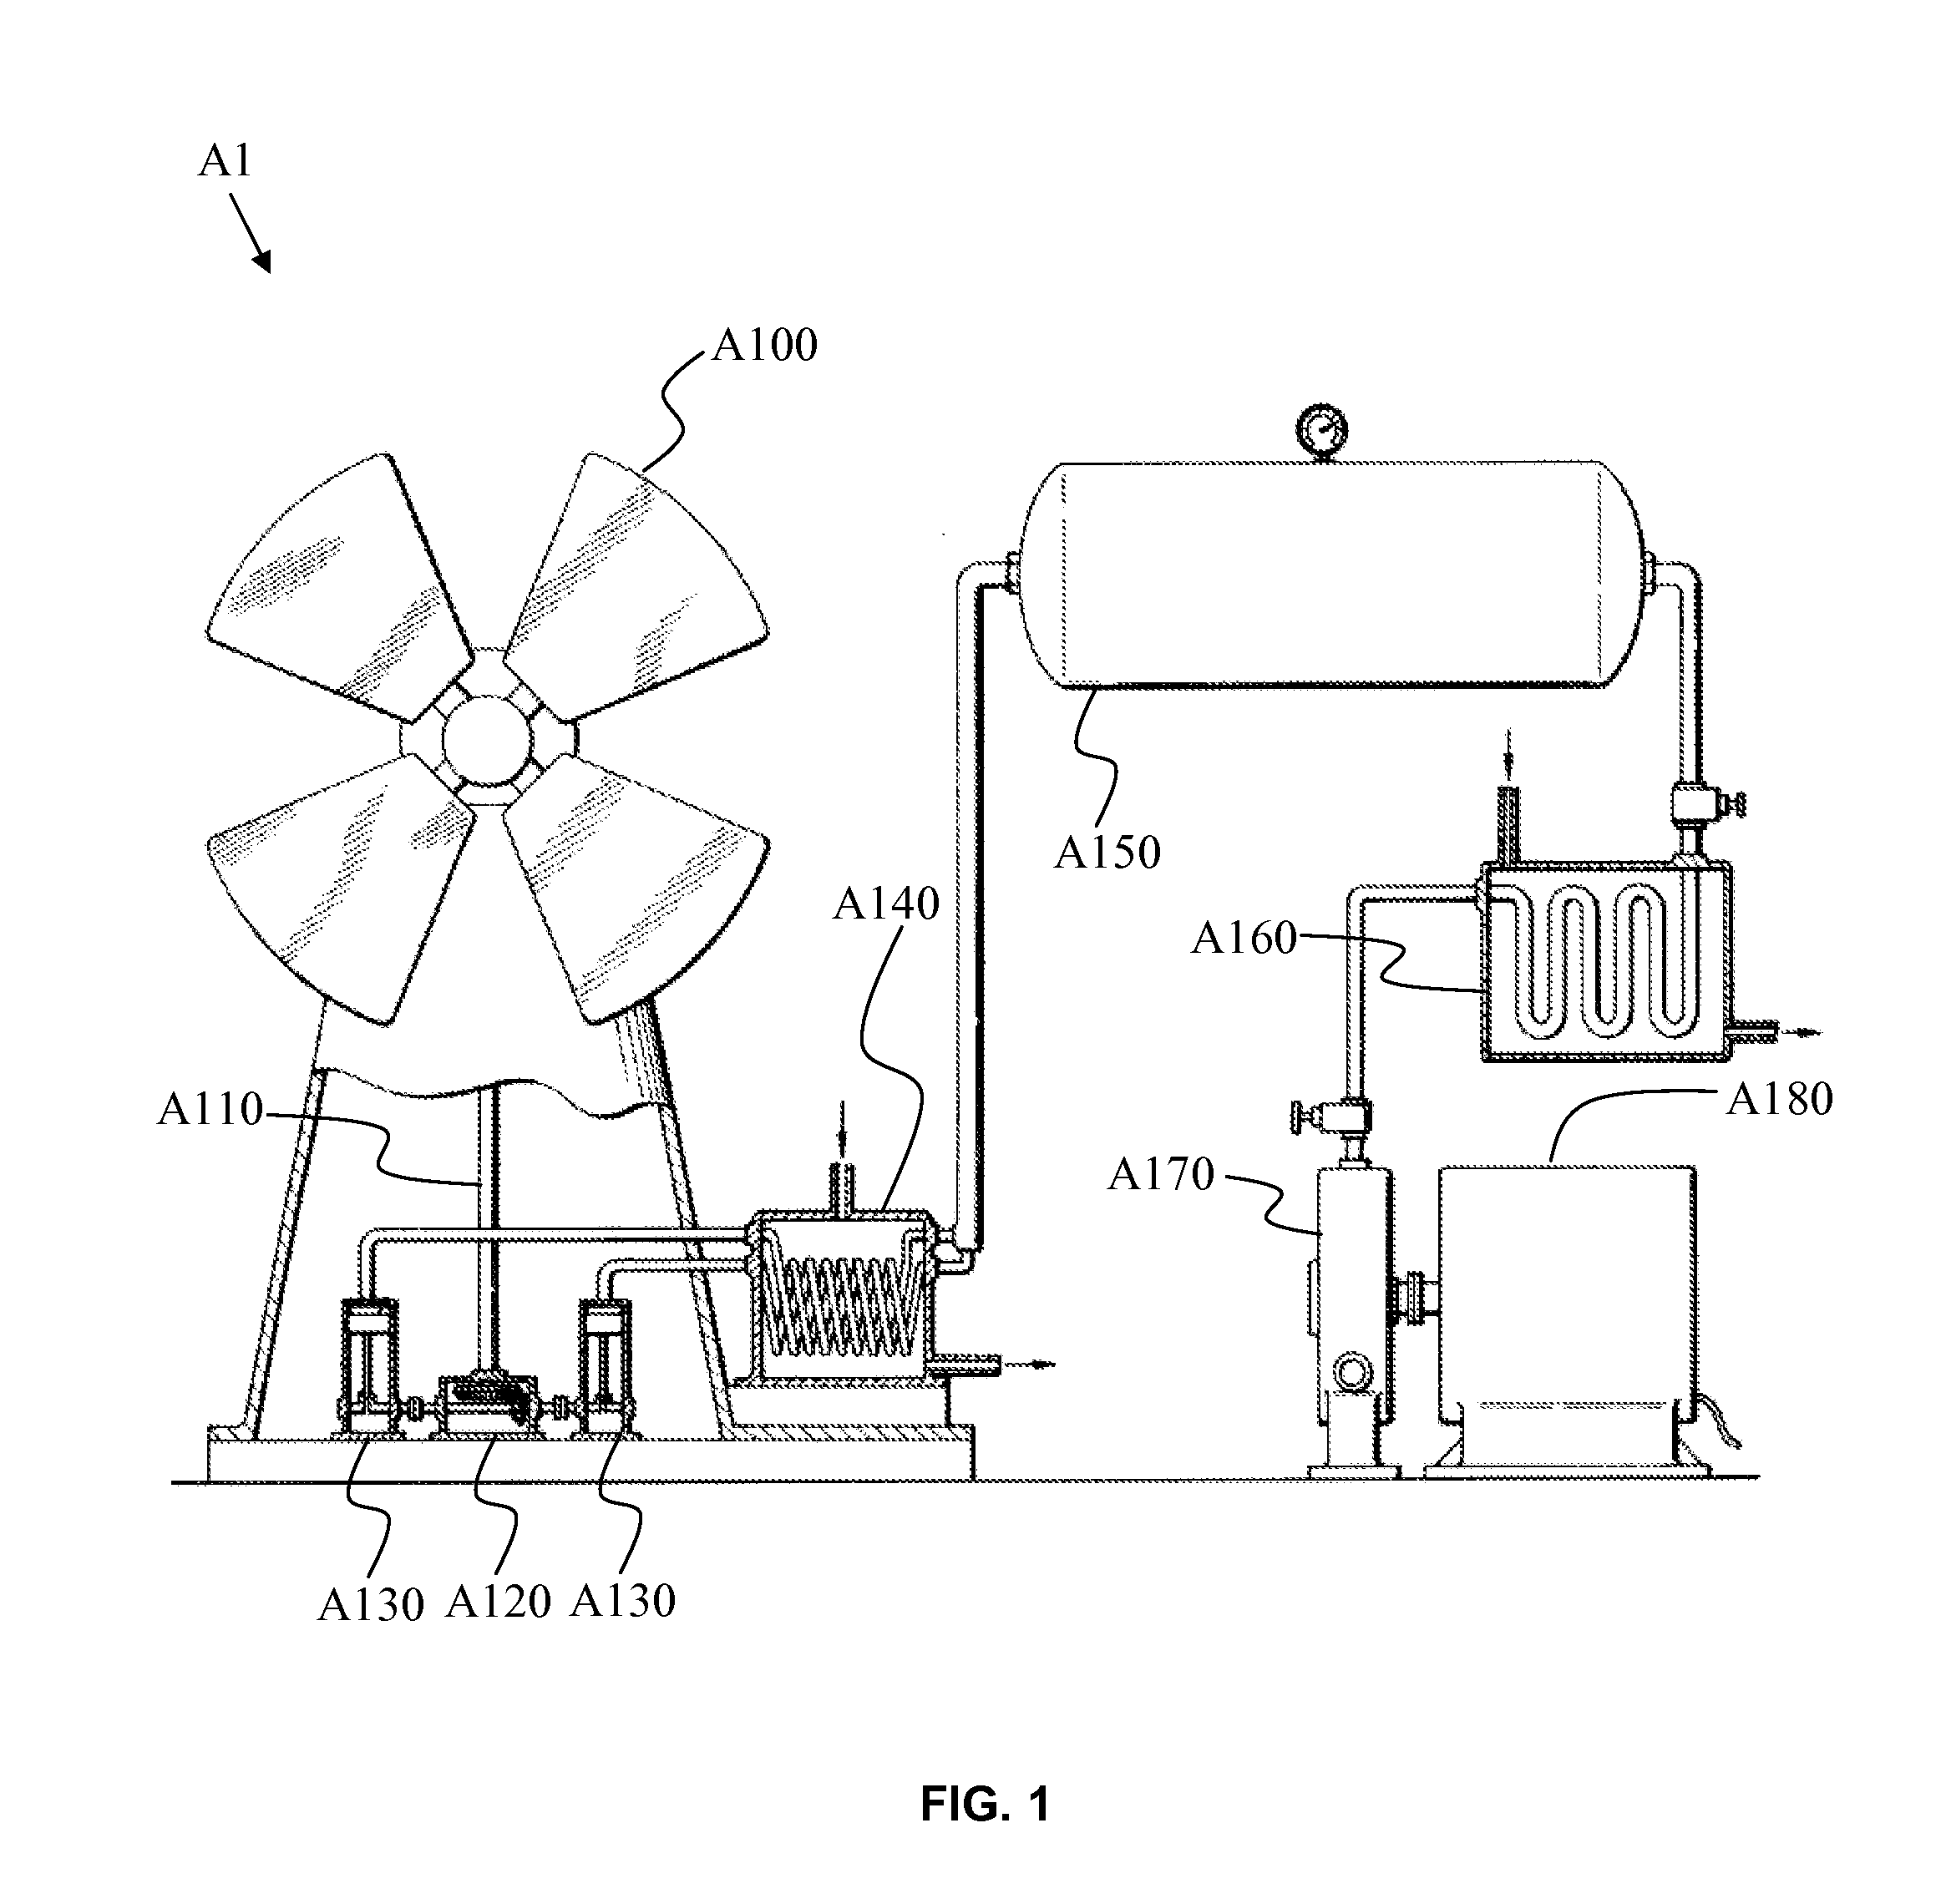 Air Compression System Having Characteristic of Storing Unstable Energy and Method for Controlling the Same